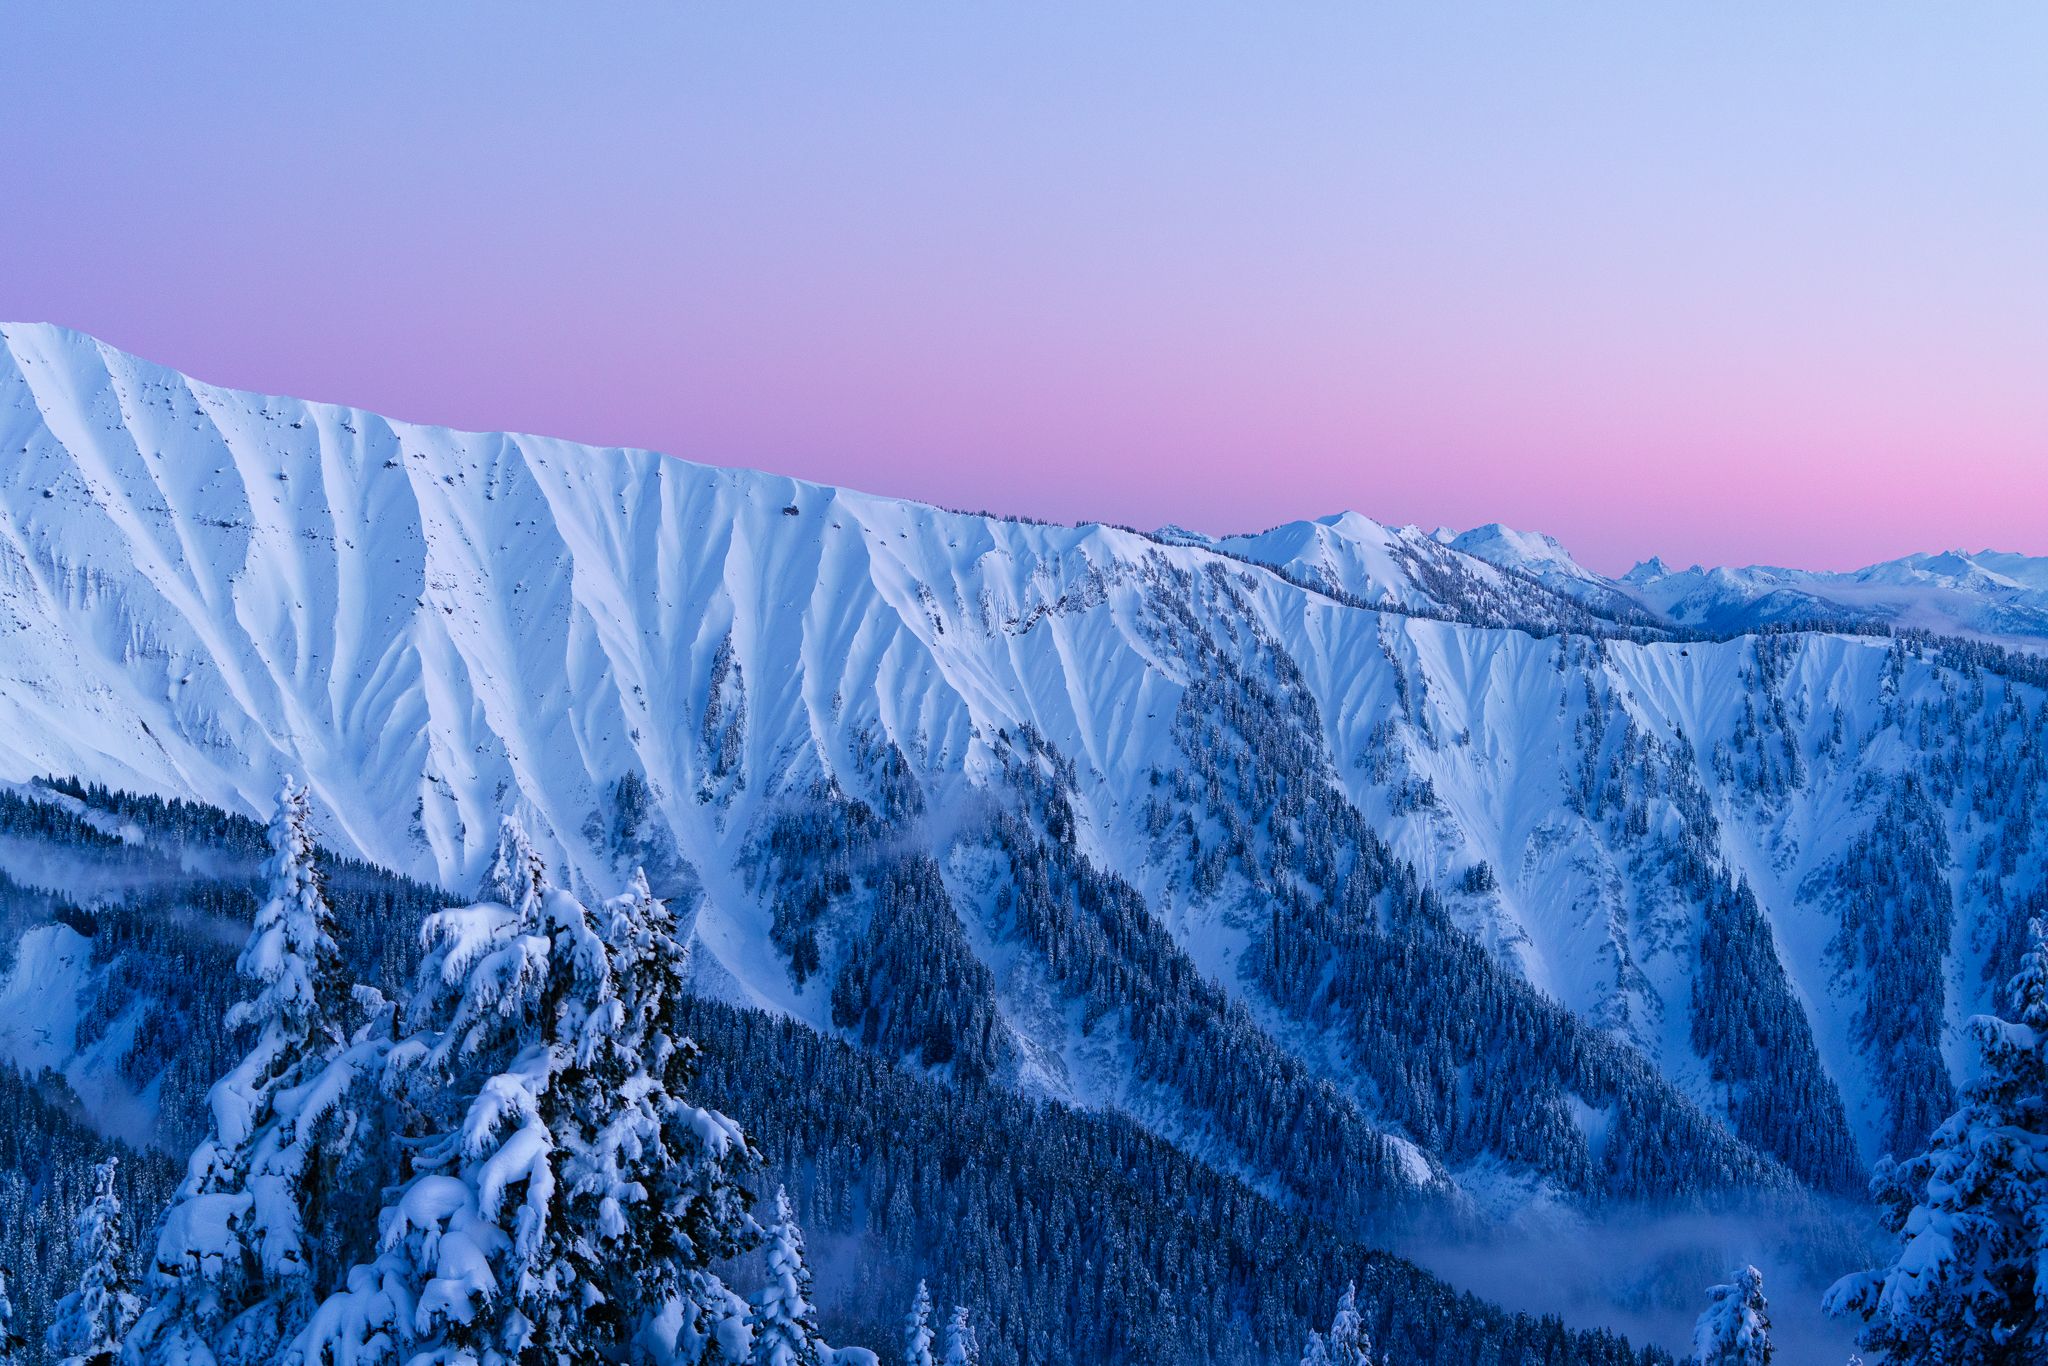 Winter hues in the Squamish backcountry